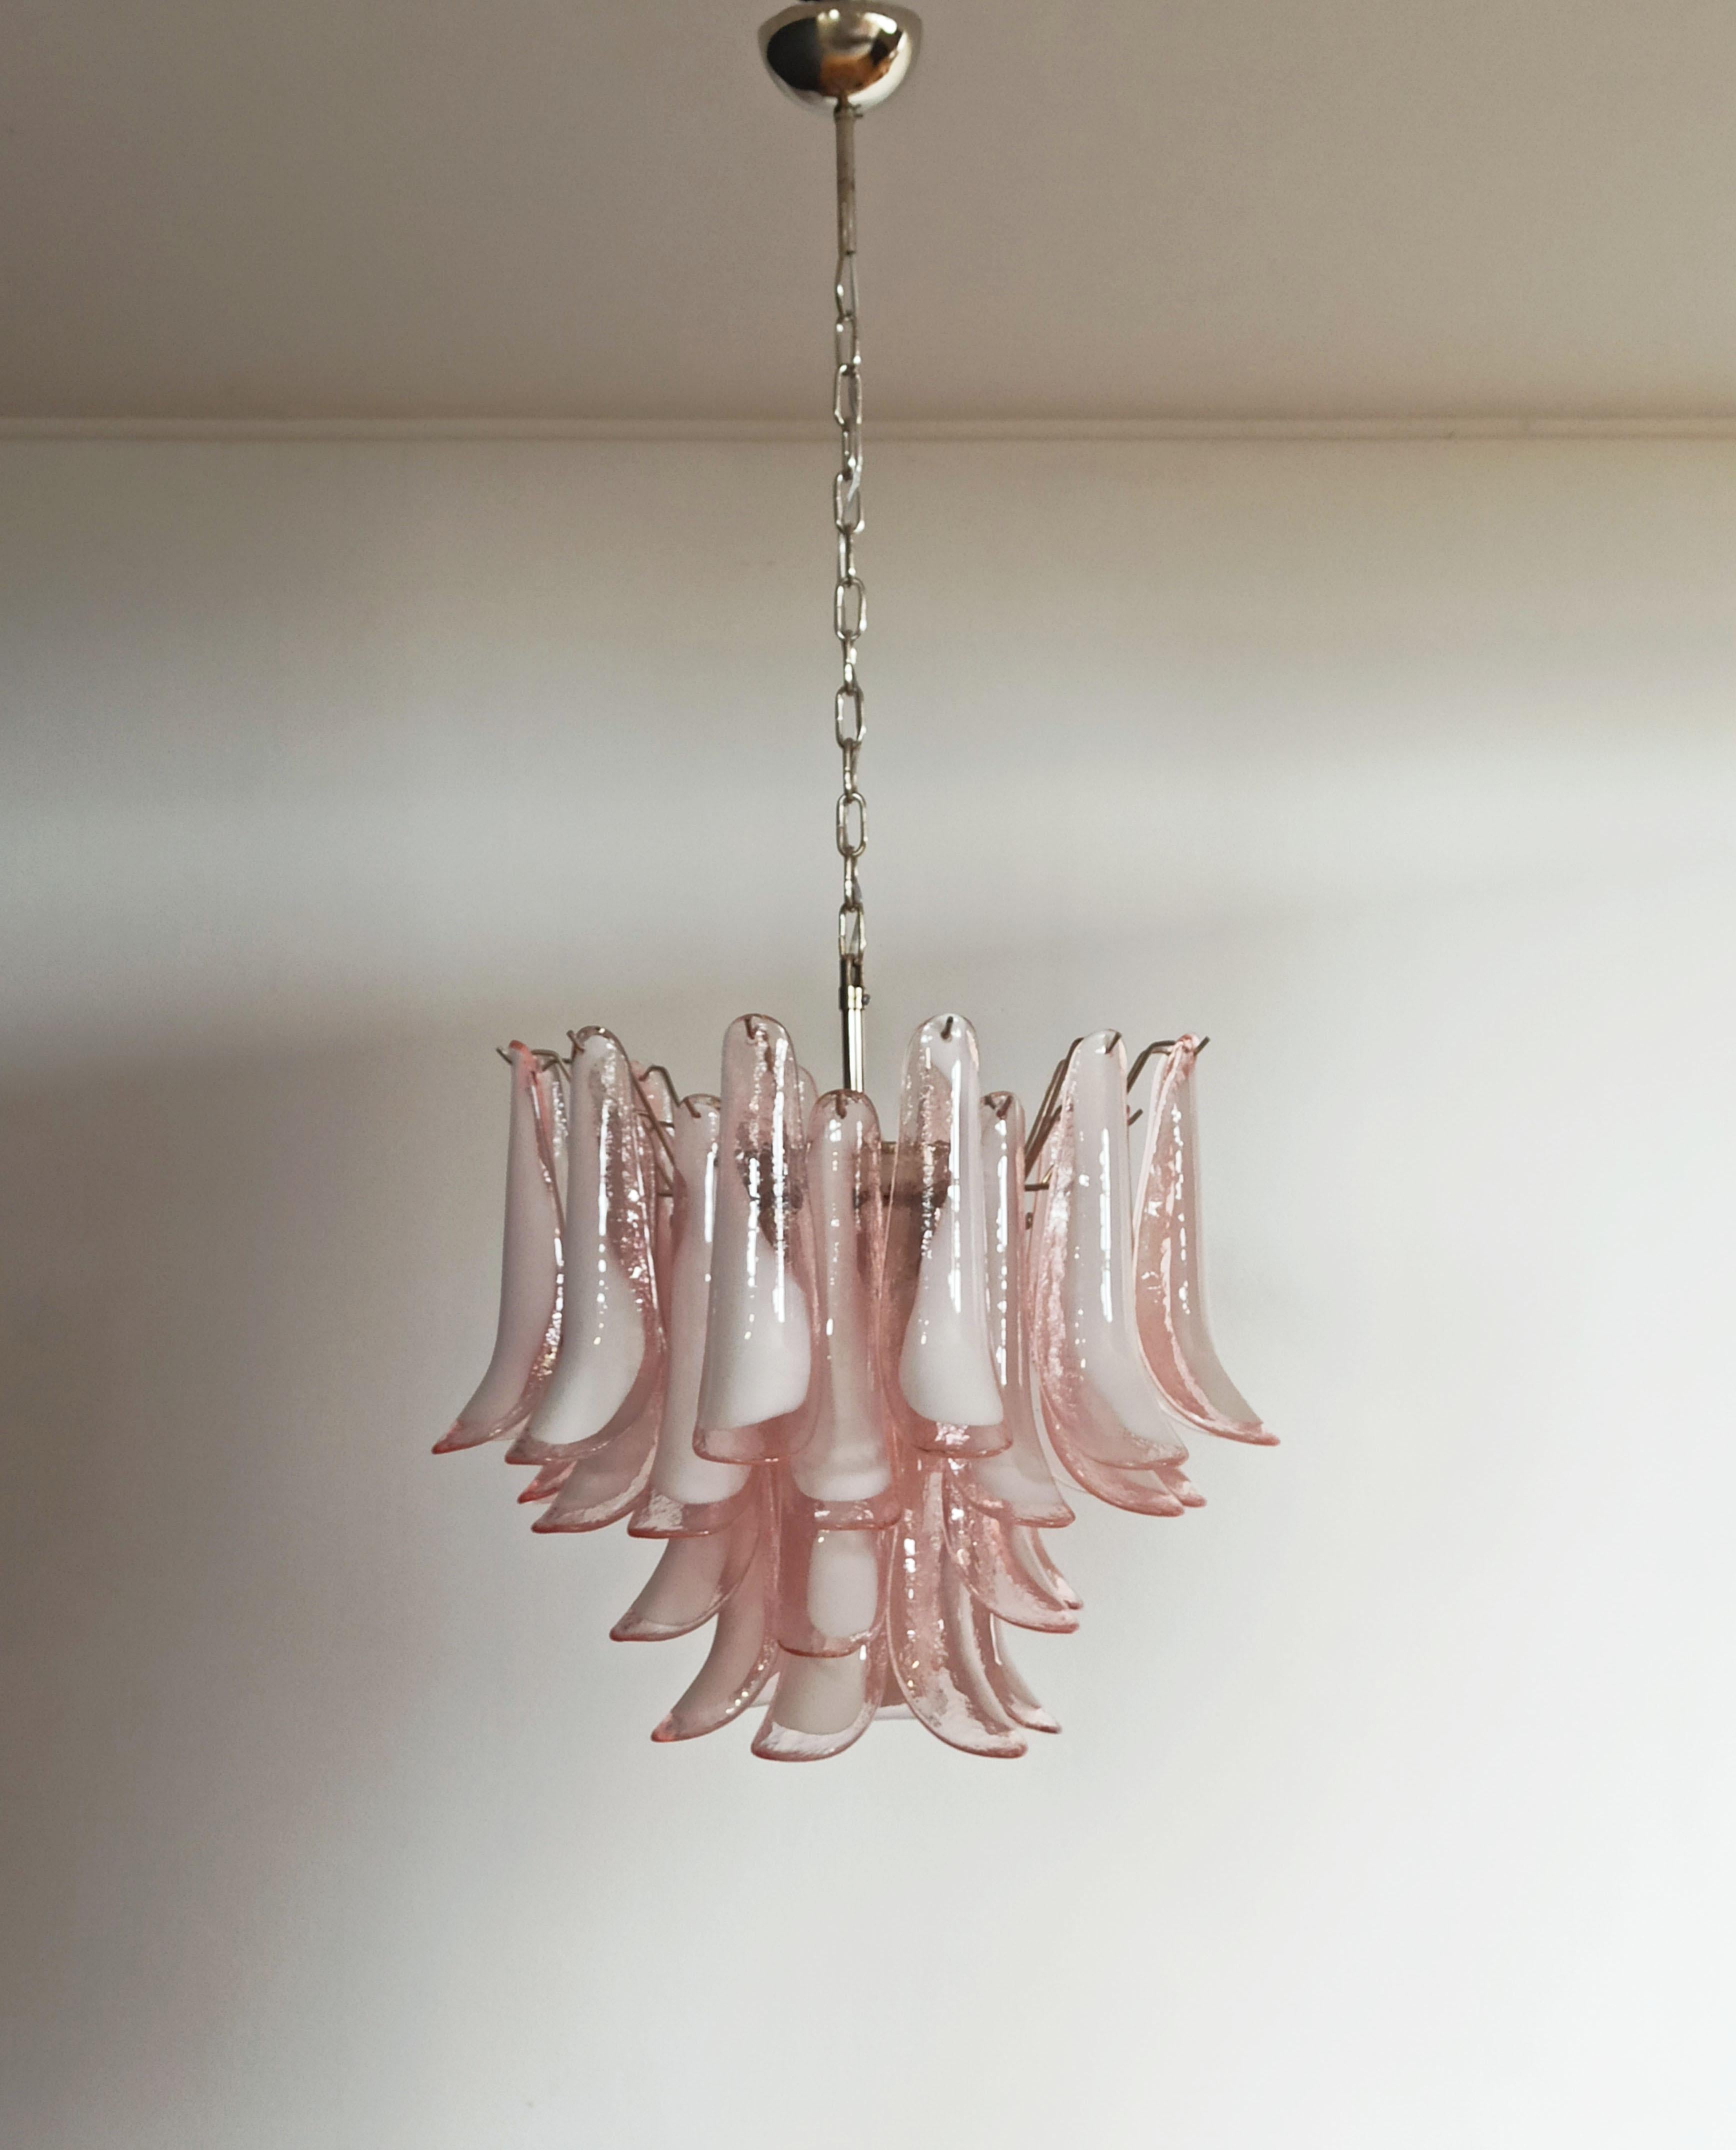 1970’s Murano Italian glass chandelier. Fantastic chandelier with pink and white “lattimo” glasses, nickel-plated metal frame. It has 36 big monumental petals glass. The glasses are very high quality, the photos do not do the beauty, luster of these